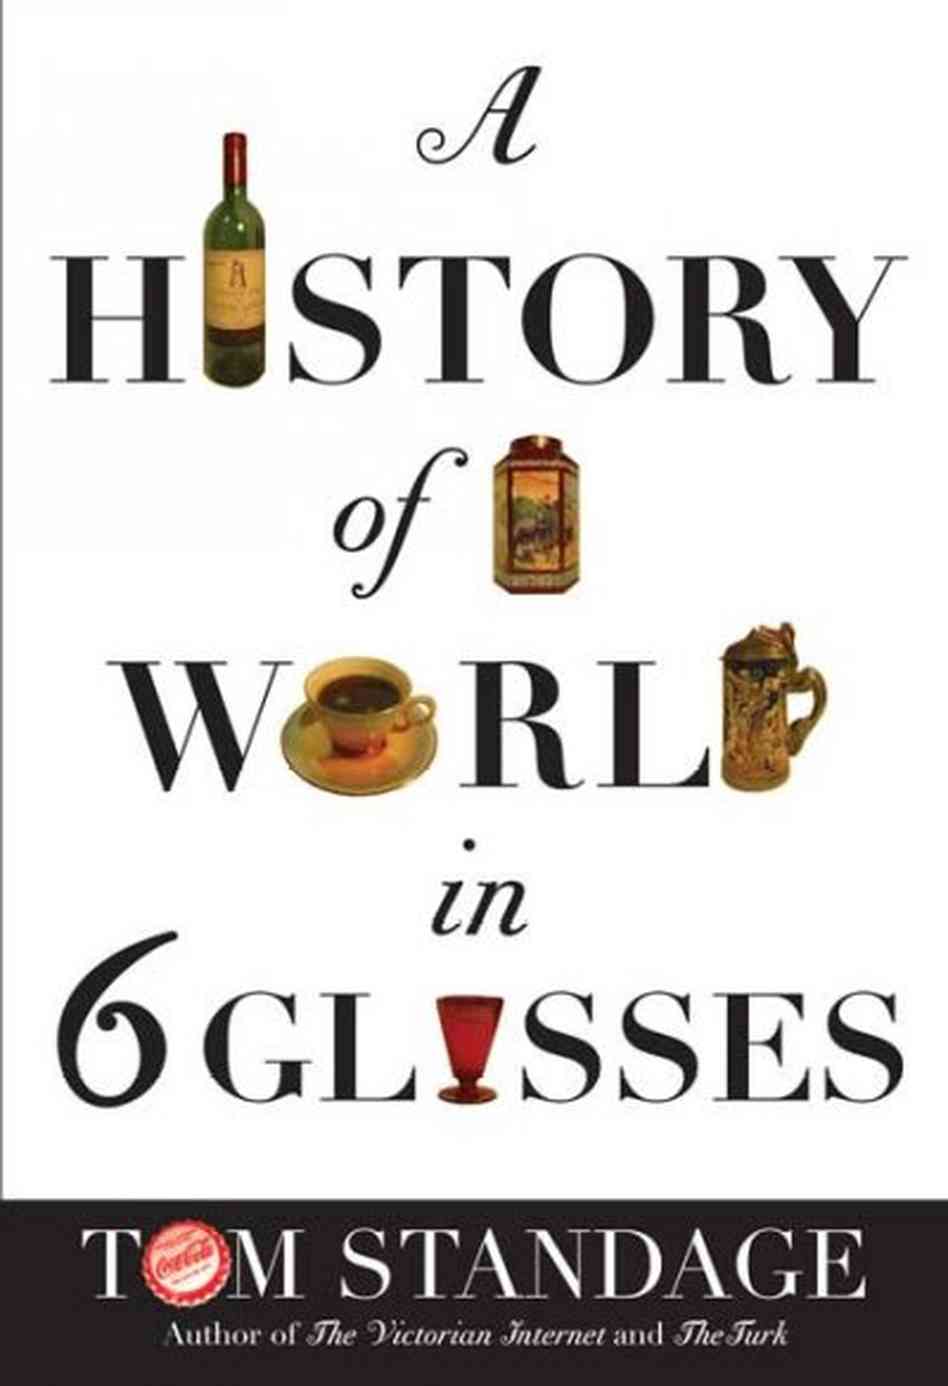 Tom Standage: A History of the World in 6 Glasses (2006, Walker Publishing Company Inc., a division of Bloomsbury USA)